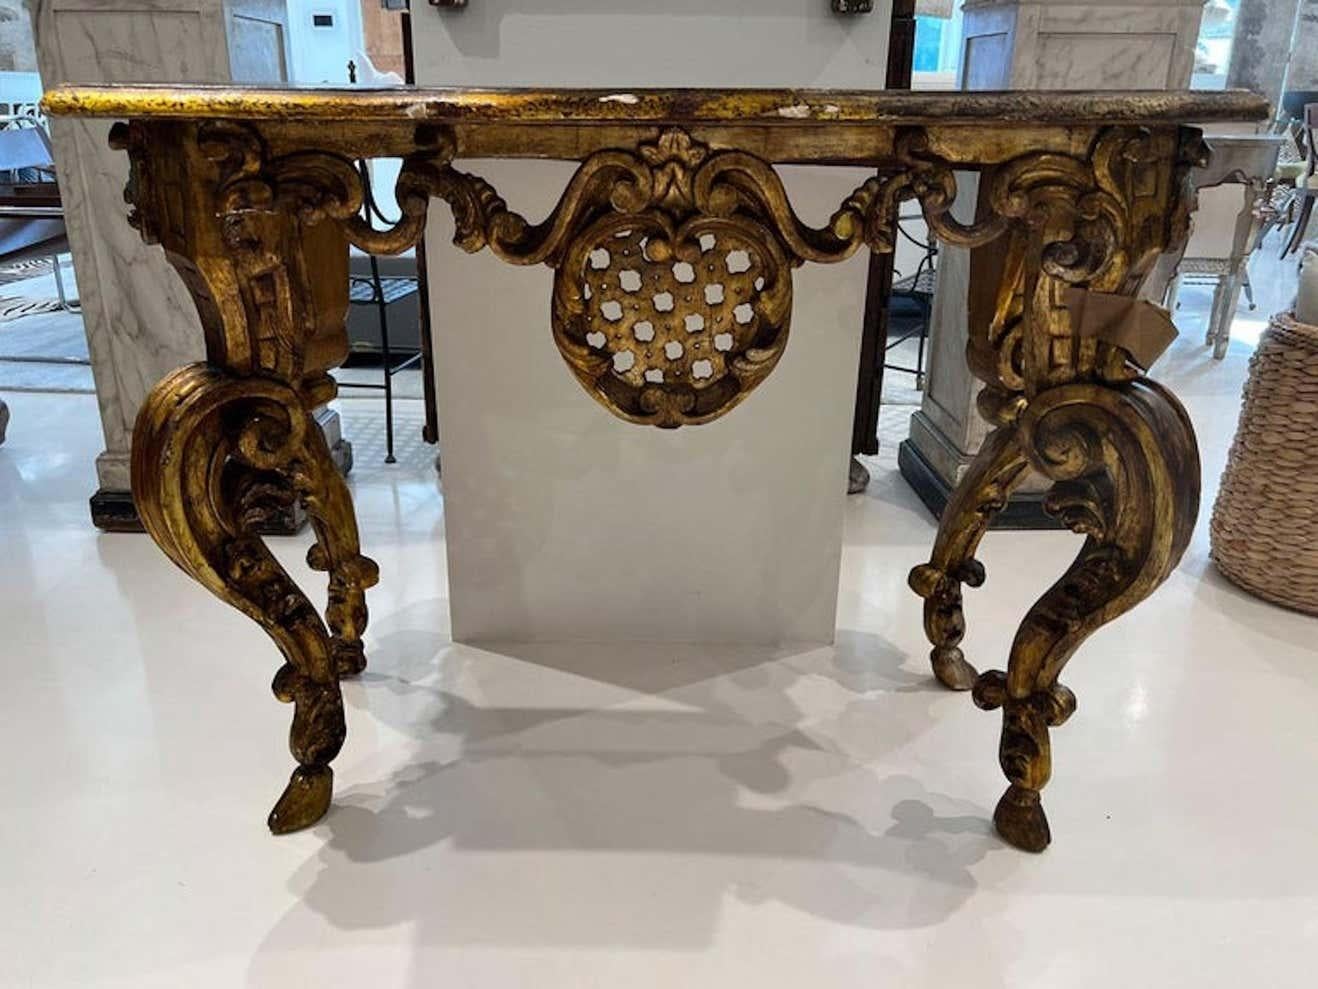 This amazing console table will not be ignored. All four legs are heavily carved with large cabriole legs tapering down to delicate hooves. The apron is festooned with swags and an unusual lattice medallion on three sides. All is topped off with a